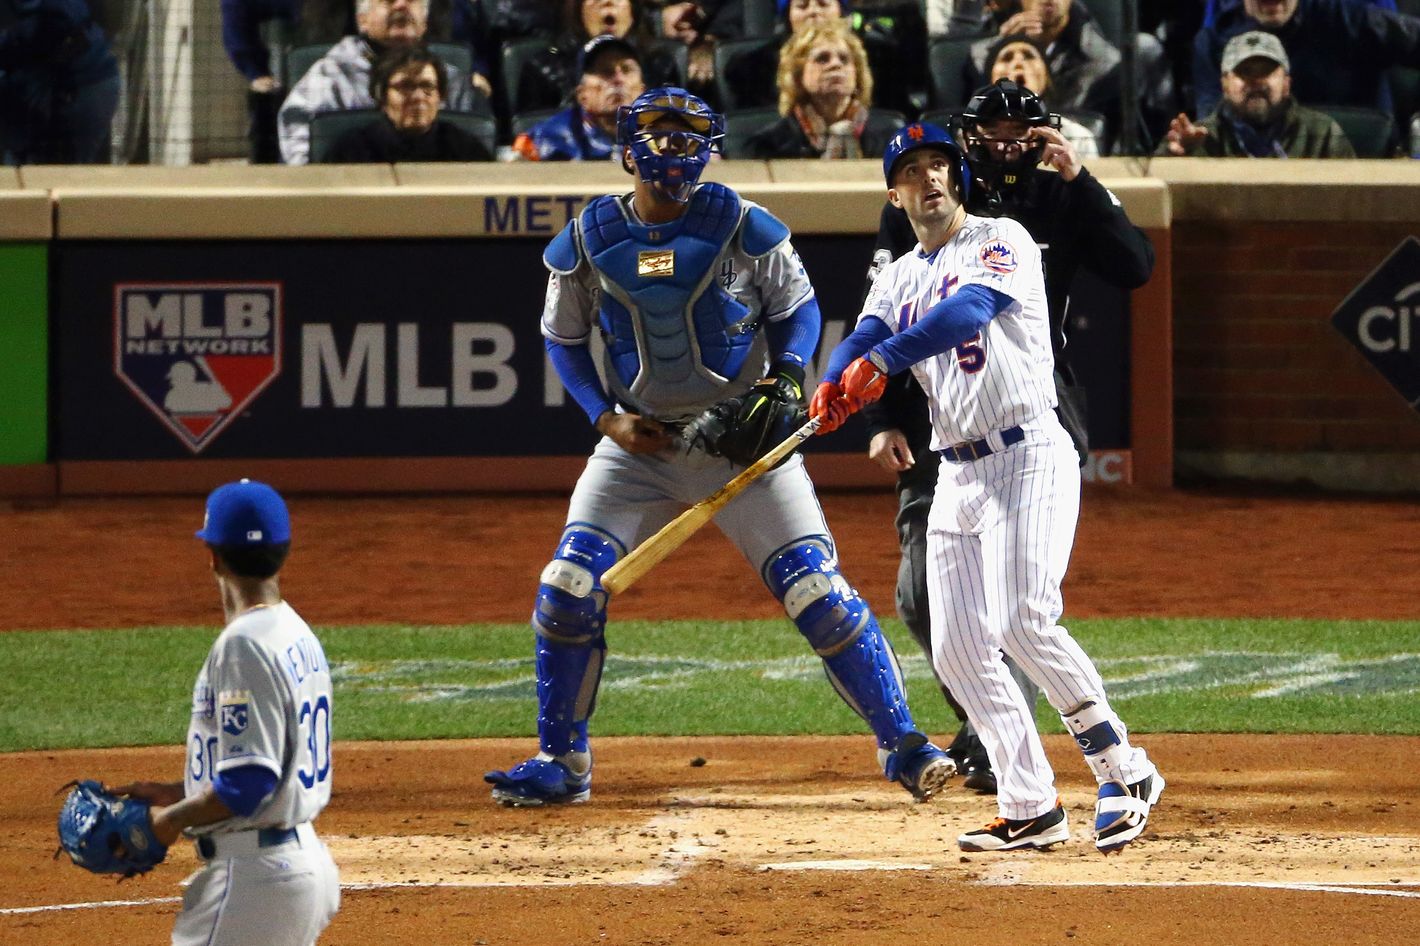 Mets win Game 3, cut Royals' lead to 2-1 in World Series